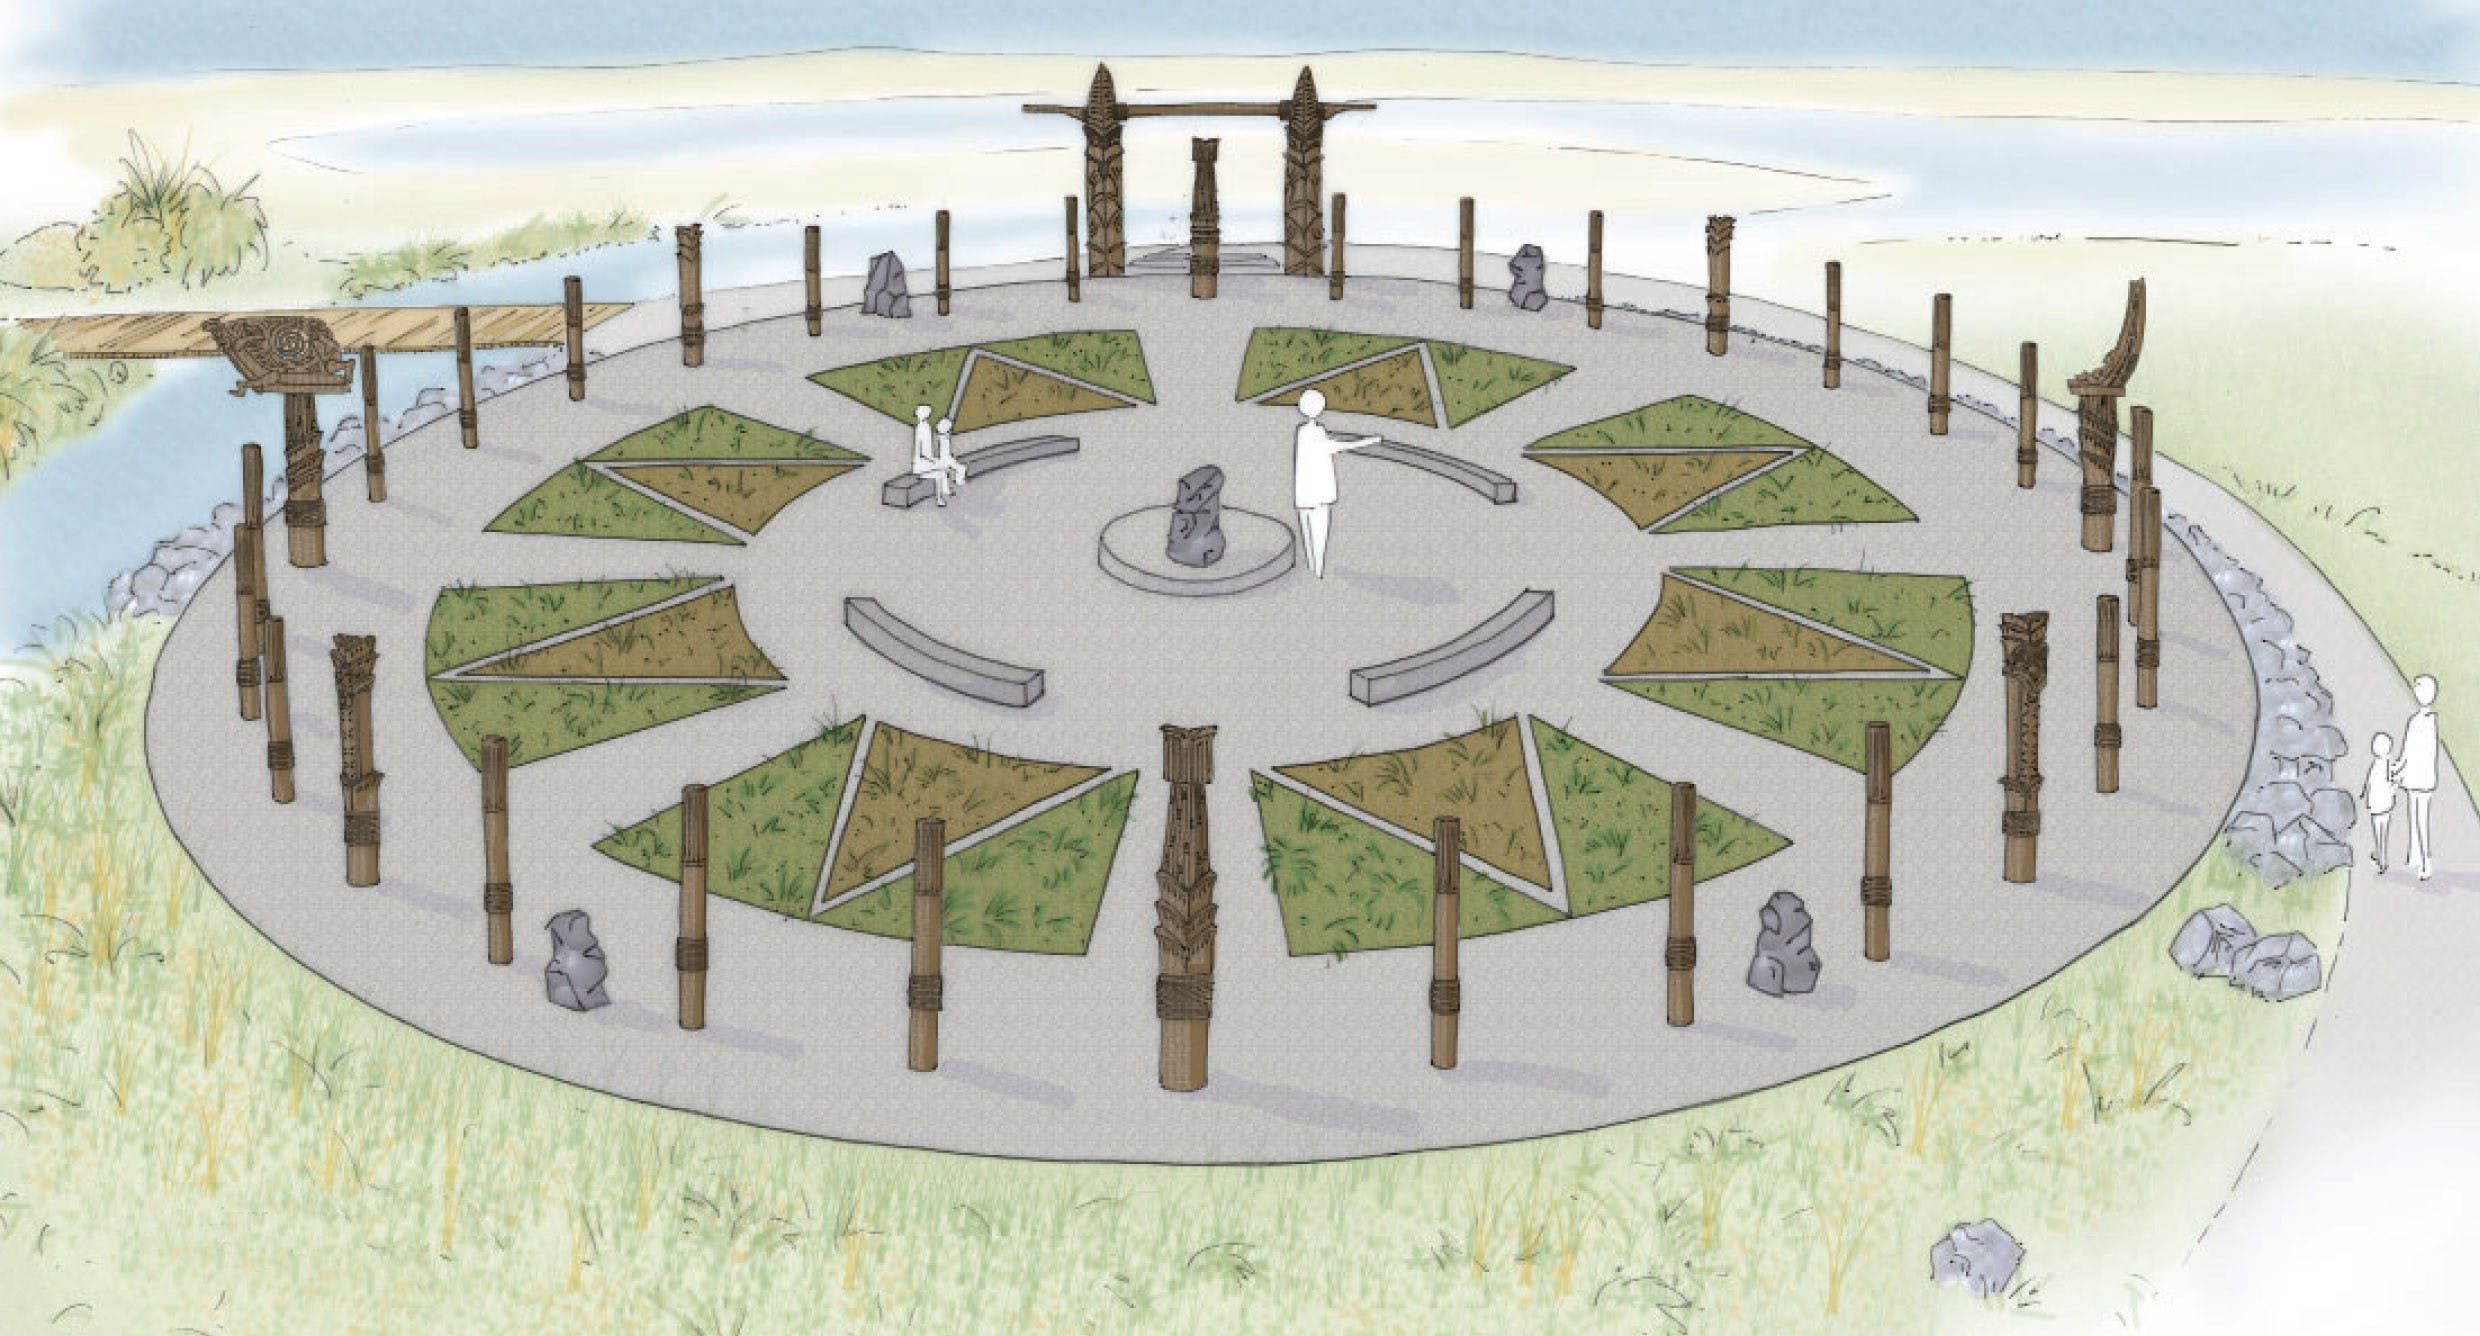 An artist rendering of the Star Compass project in Hawkes Bay, New Zealand. Photo Credit: Piripi Smith of Te Matau a Māui Voyaging Trust